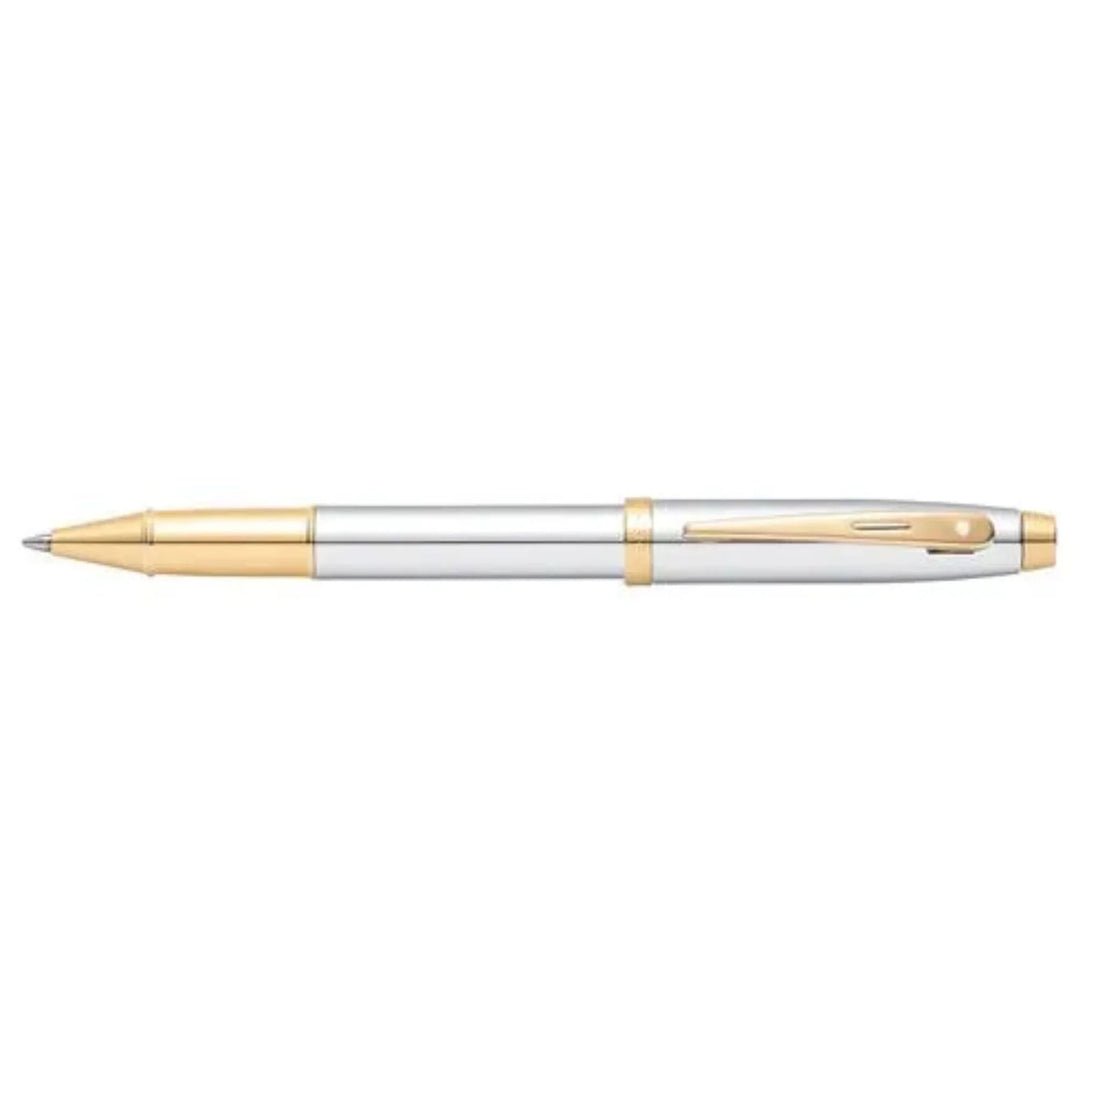 WP23910 -PEN SHEAFFER GIFT 100 A 9340 - BRIGHT CHROME WITH GOLD TONE TRIM RB